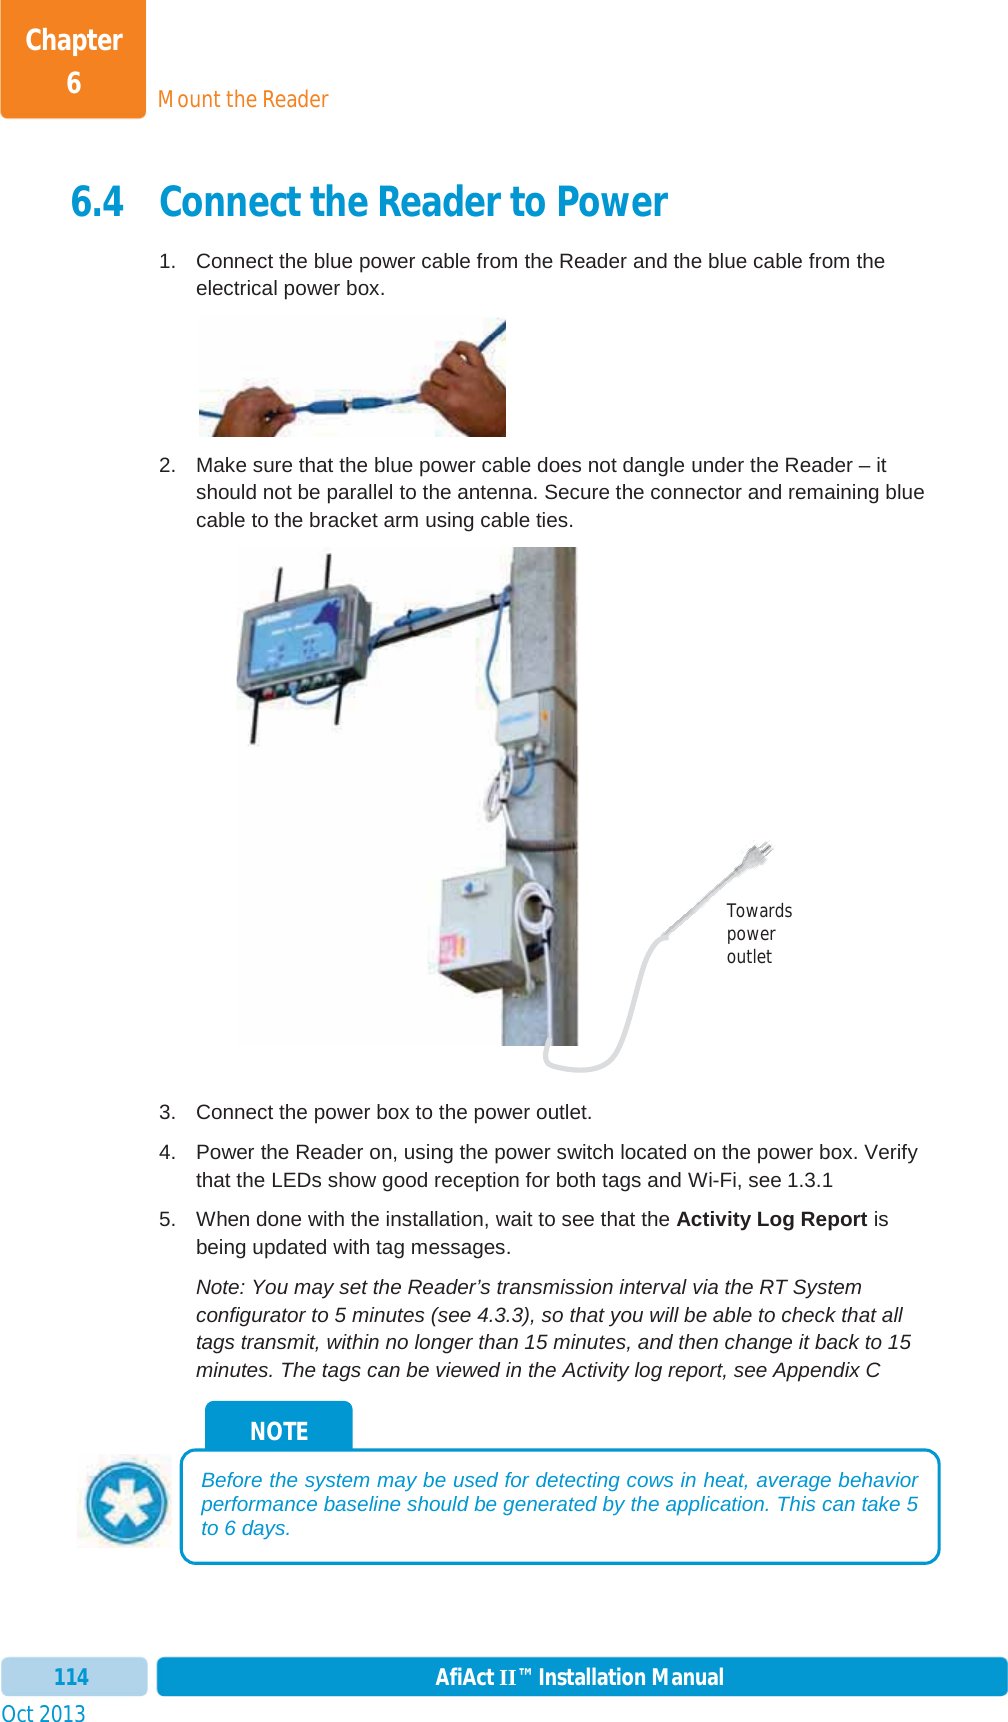 Mount the ReaderChapter 6Oct 2013 AfiAct II™ Installation Manual1146.4 Connect the Reader to Power 1.  Connect the blue power cable from the Reader and the blue cable from the electrical power box. 2.  Make sure that the blue power cable does not dangle under the Reader – it should not be parallel to the antenna. Secure the connector and remaining blue cable to the bracket arm using cable ties.   3.  Connect the power box to the power outlet. 4.  Power the Reader on, using the power switch located on the power box. Verify that the LEDs show good reception for both tags and Wi-Fi, see  1.3.1 5.  When done with the installation, wait to see that the Activity Log Report is being updated with tag messages.  Note: You may set the Reader’s transmission interval via the RT System configurator to 5 minutes (see  4.3.3), so that you will be able to check that all tags transmit, within no longer than 15 minutes, and then change it back to 15 minutes. The tags can be viewed in the Activity log report, see  Appendix C NOTE Before the system may be used for detecting cows in heat, average behavior performance baseline should be generated by the application. This can take 5 to 6 days. Towards power outlet 